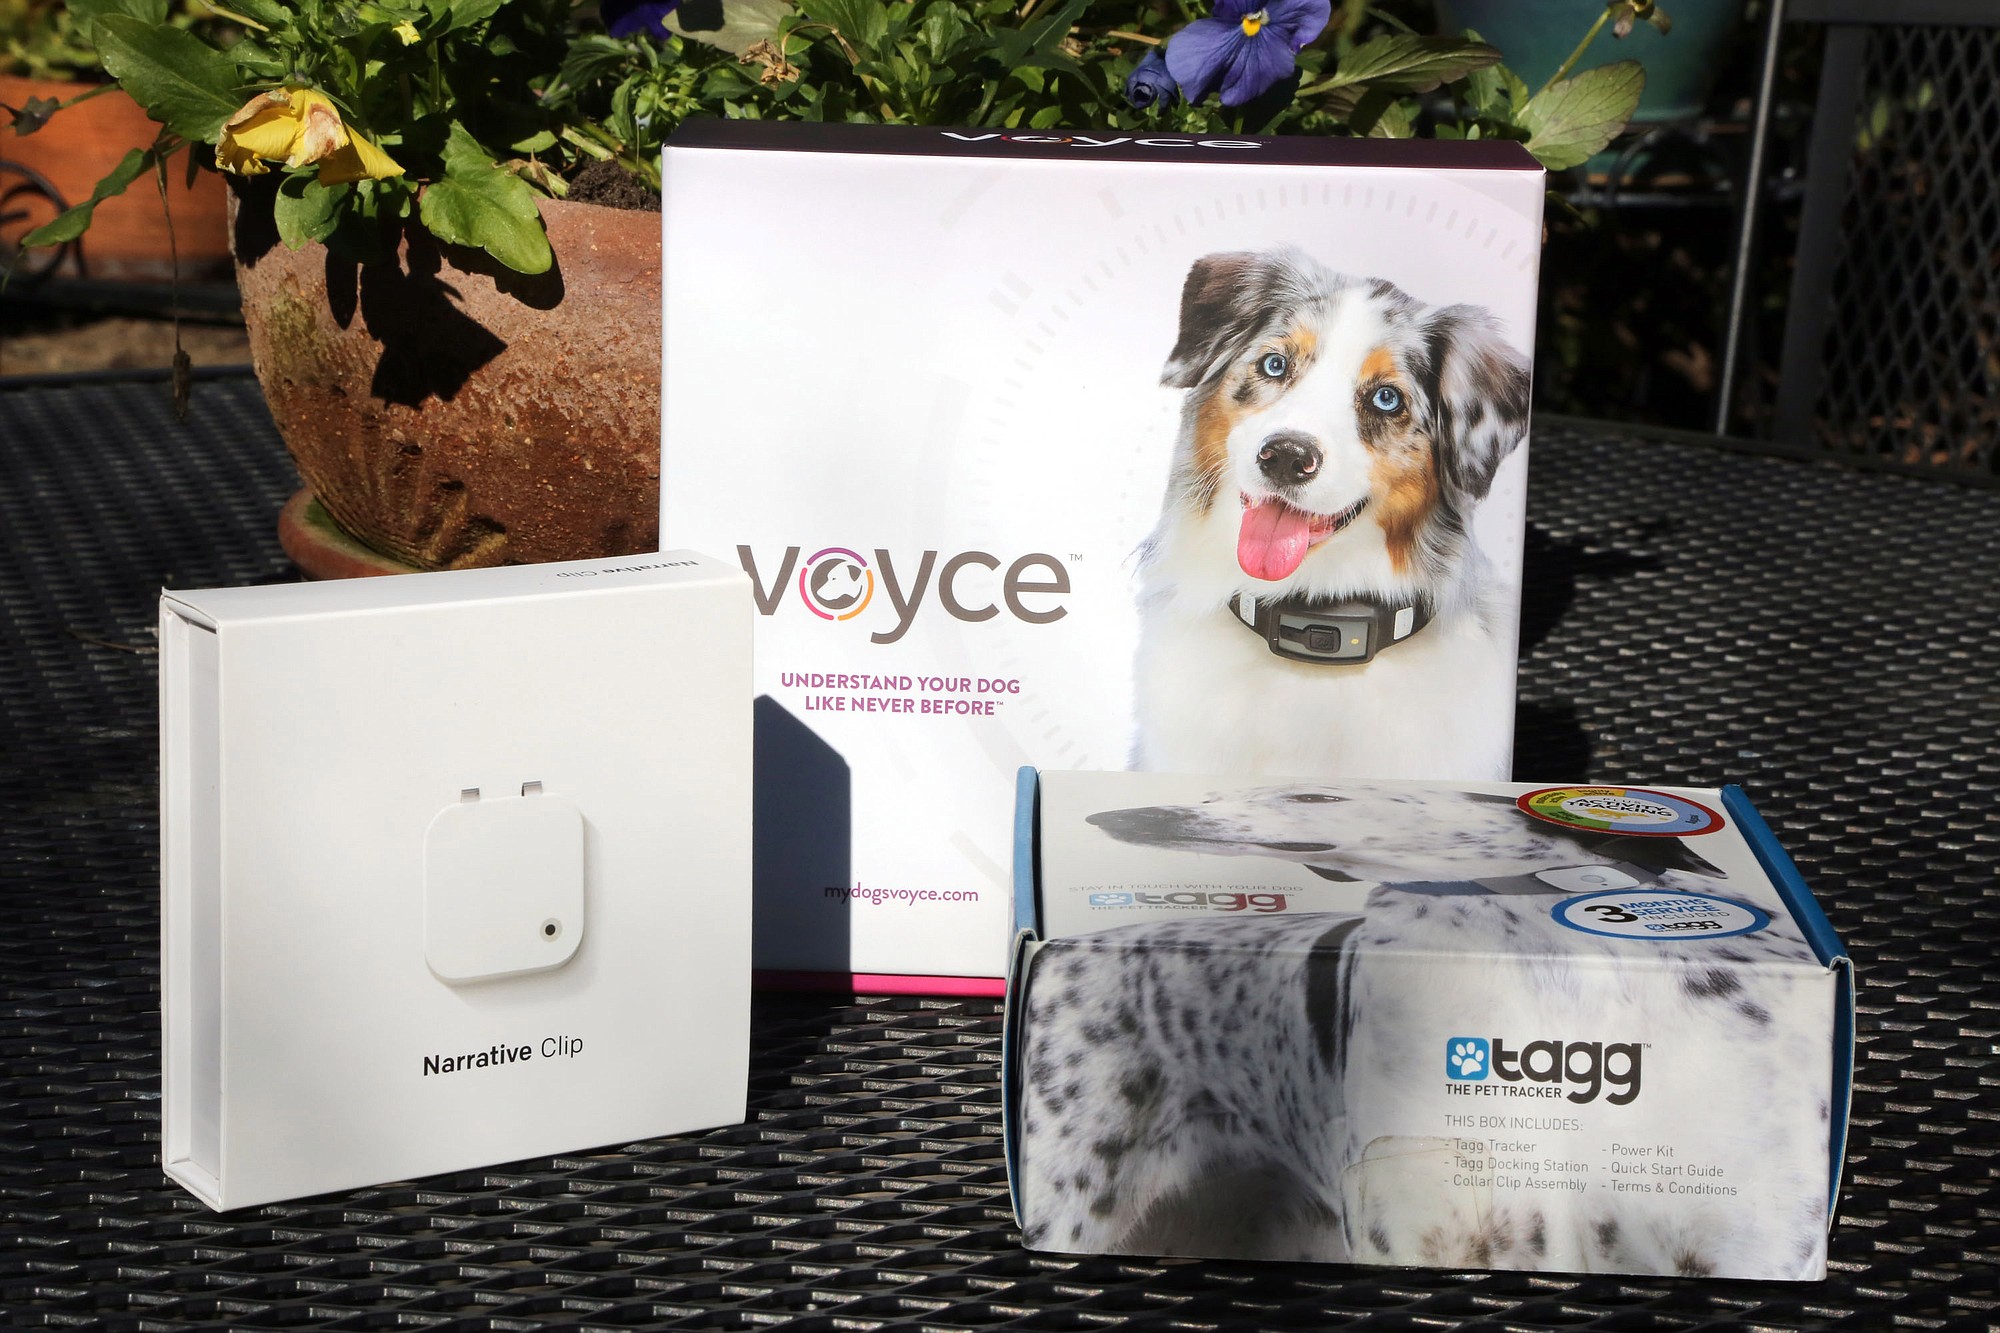 Three pet tech devices, from left: the Narrative Clip, a wearable camera; Voyce, a device that tracks a pet's activity level; and Tagg, a pet-tracking device.